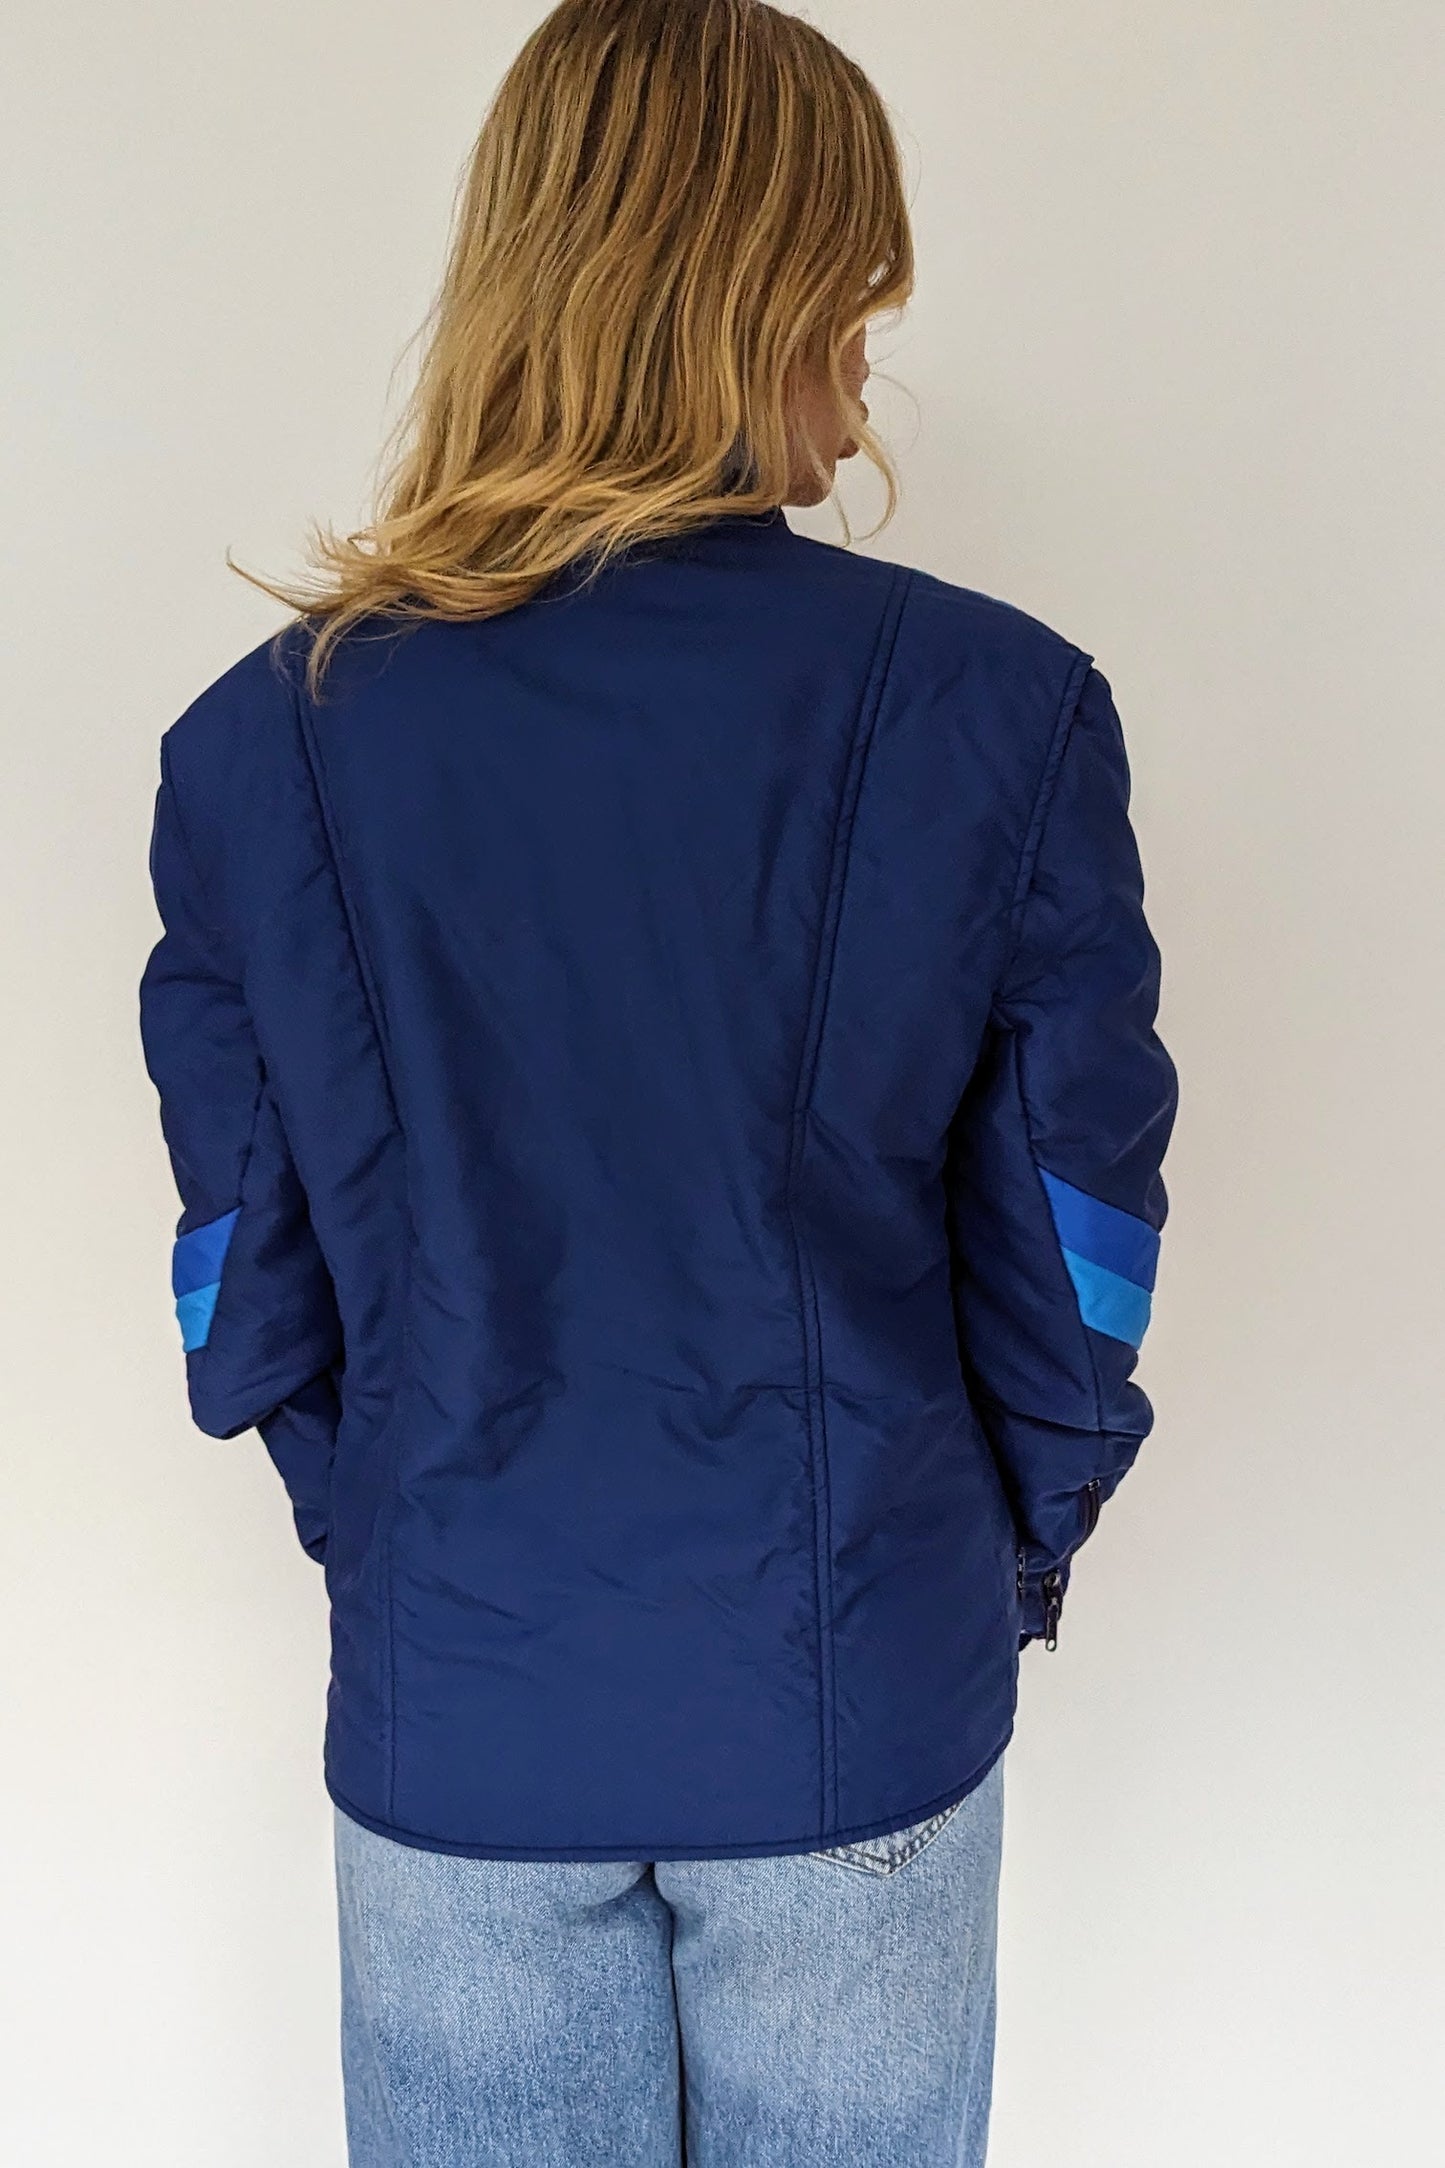 back of vintage blue puffer ski jacket with different tones of blue stripes on front, sleeves and neck